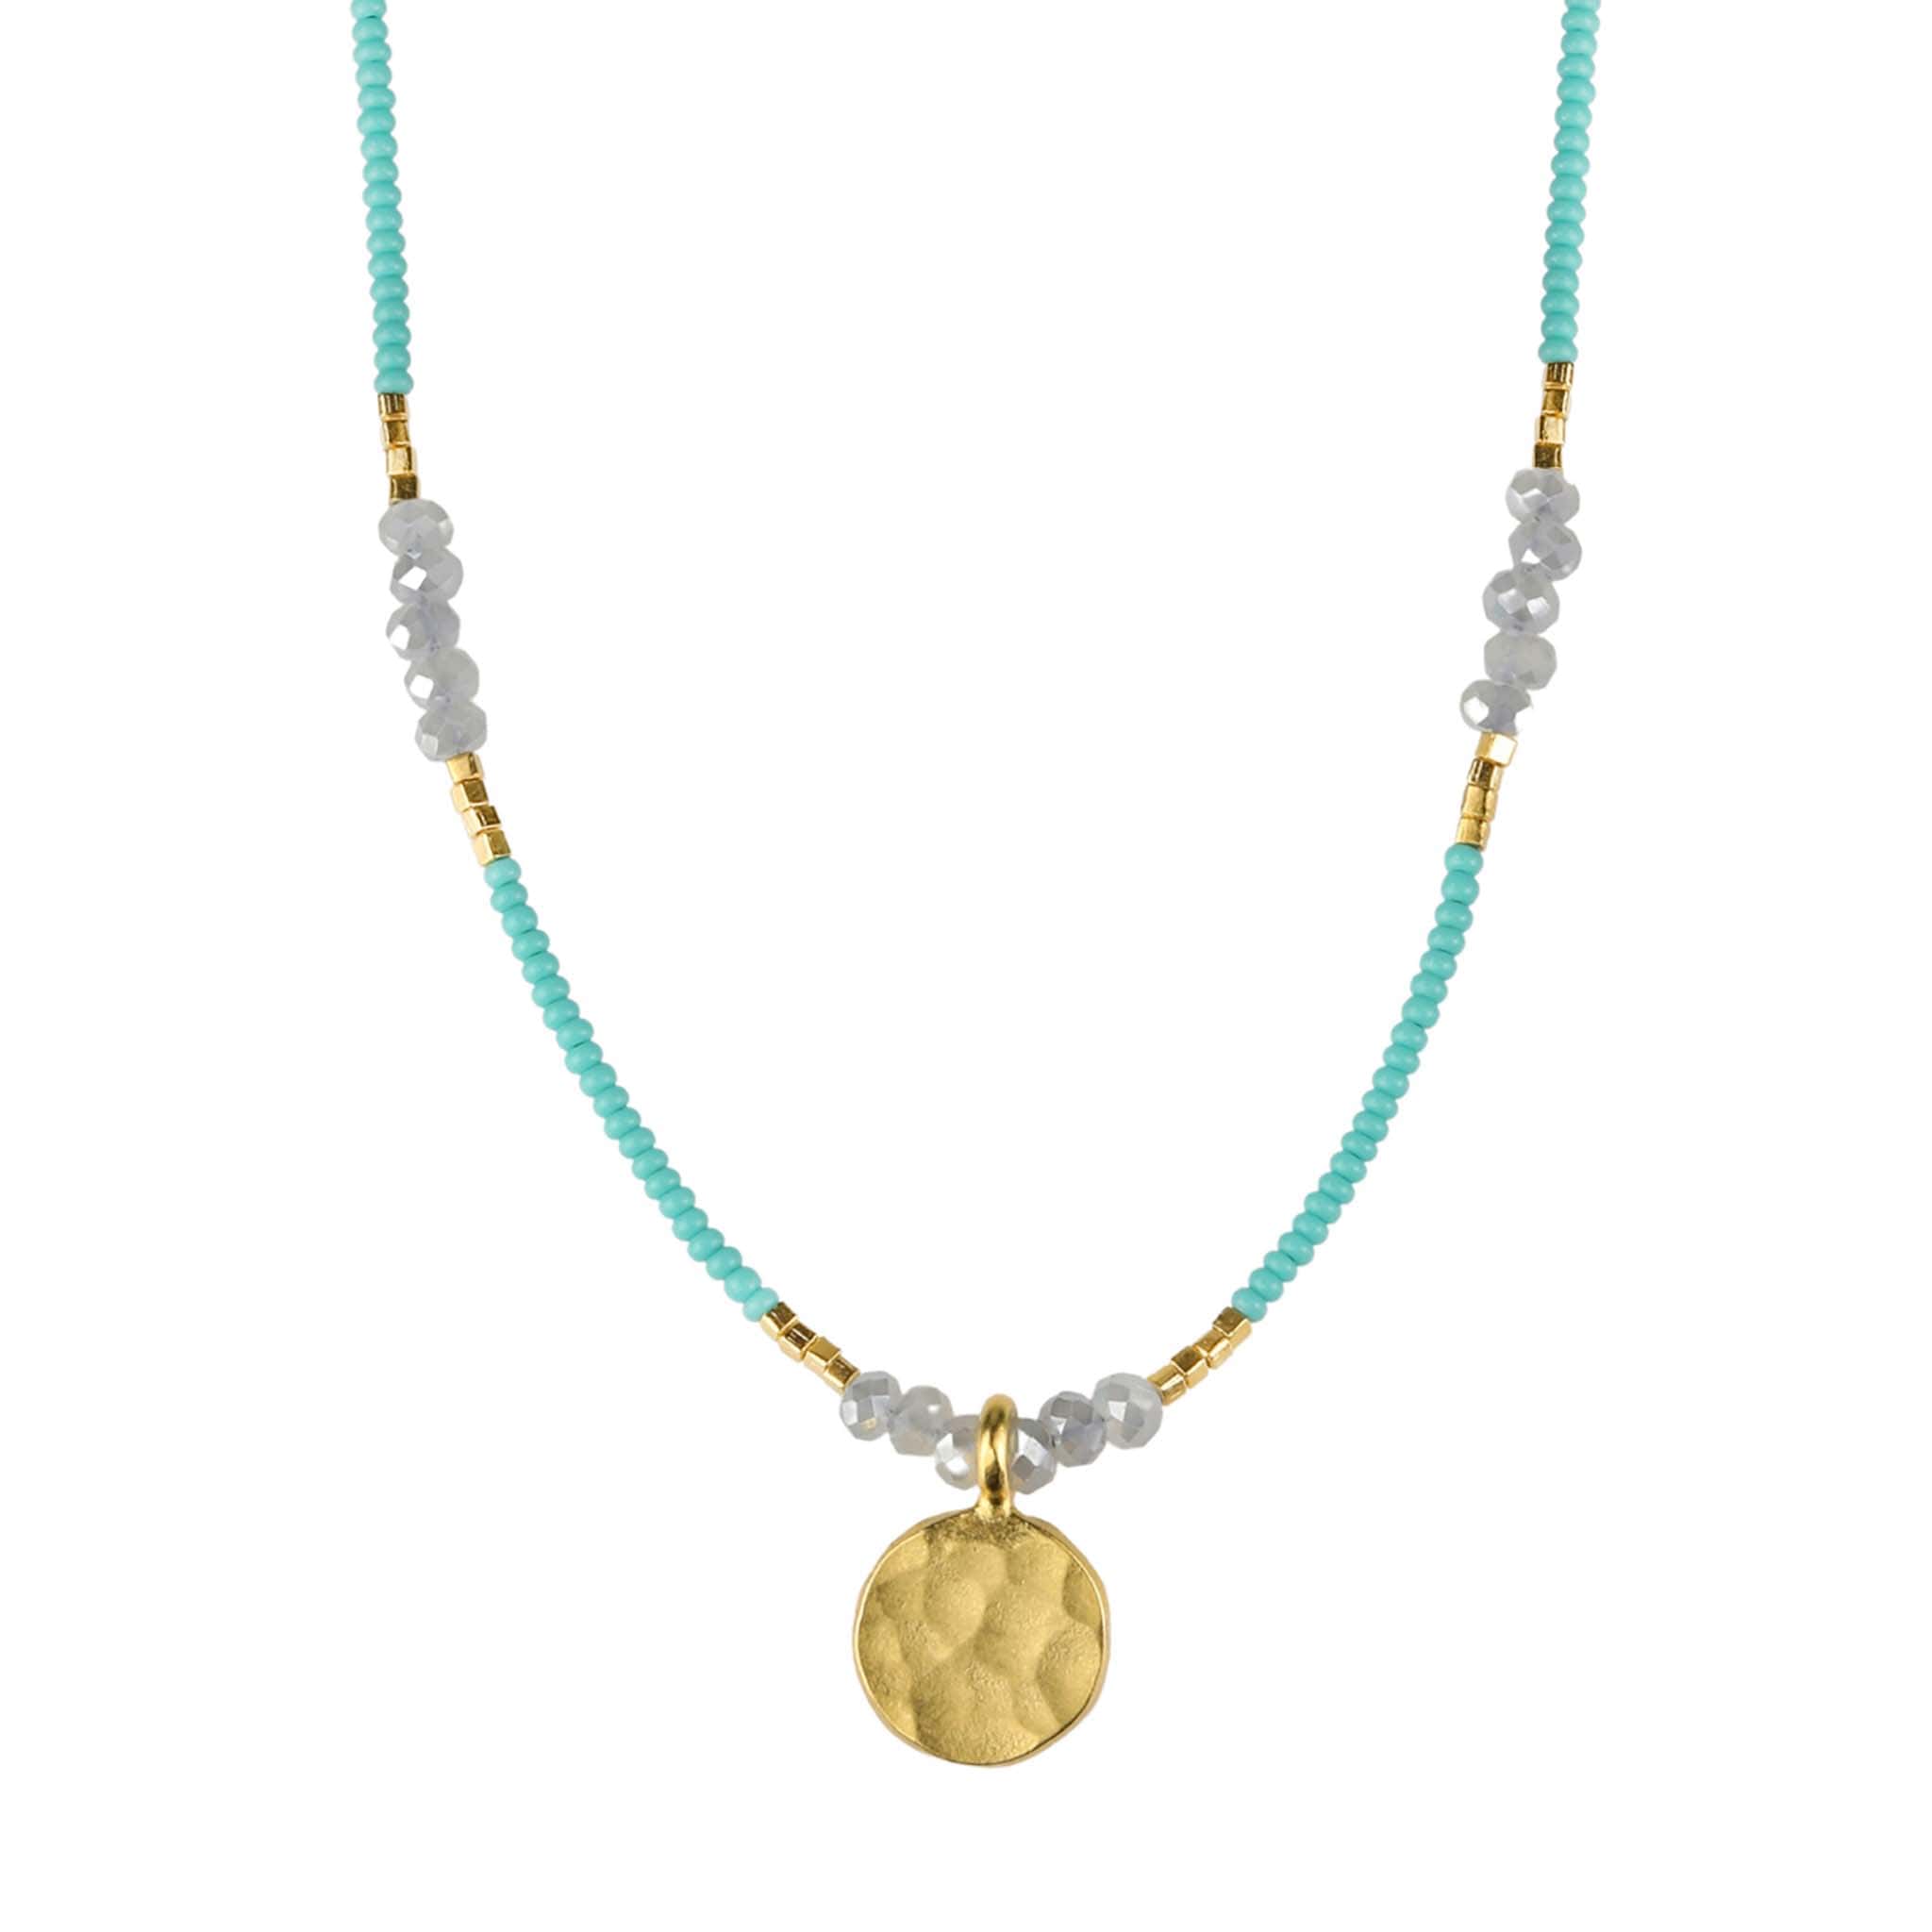 Debbie Fisher Turquoise Seed Bead Necklace with Grey Quartz &amp; Gold Disc Drop